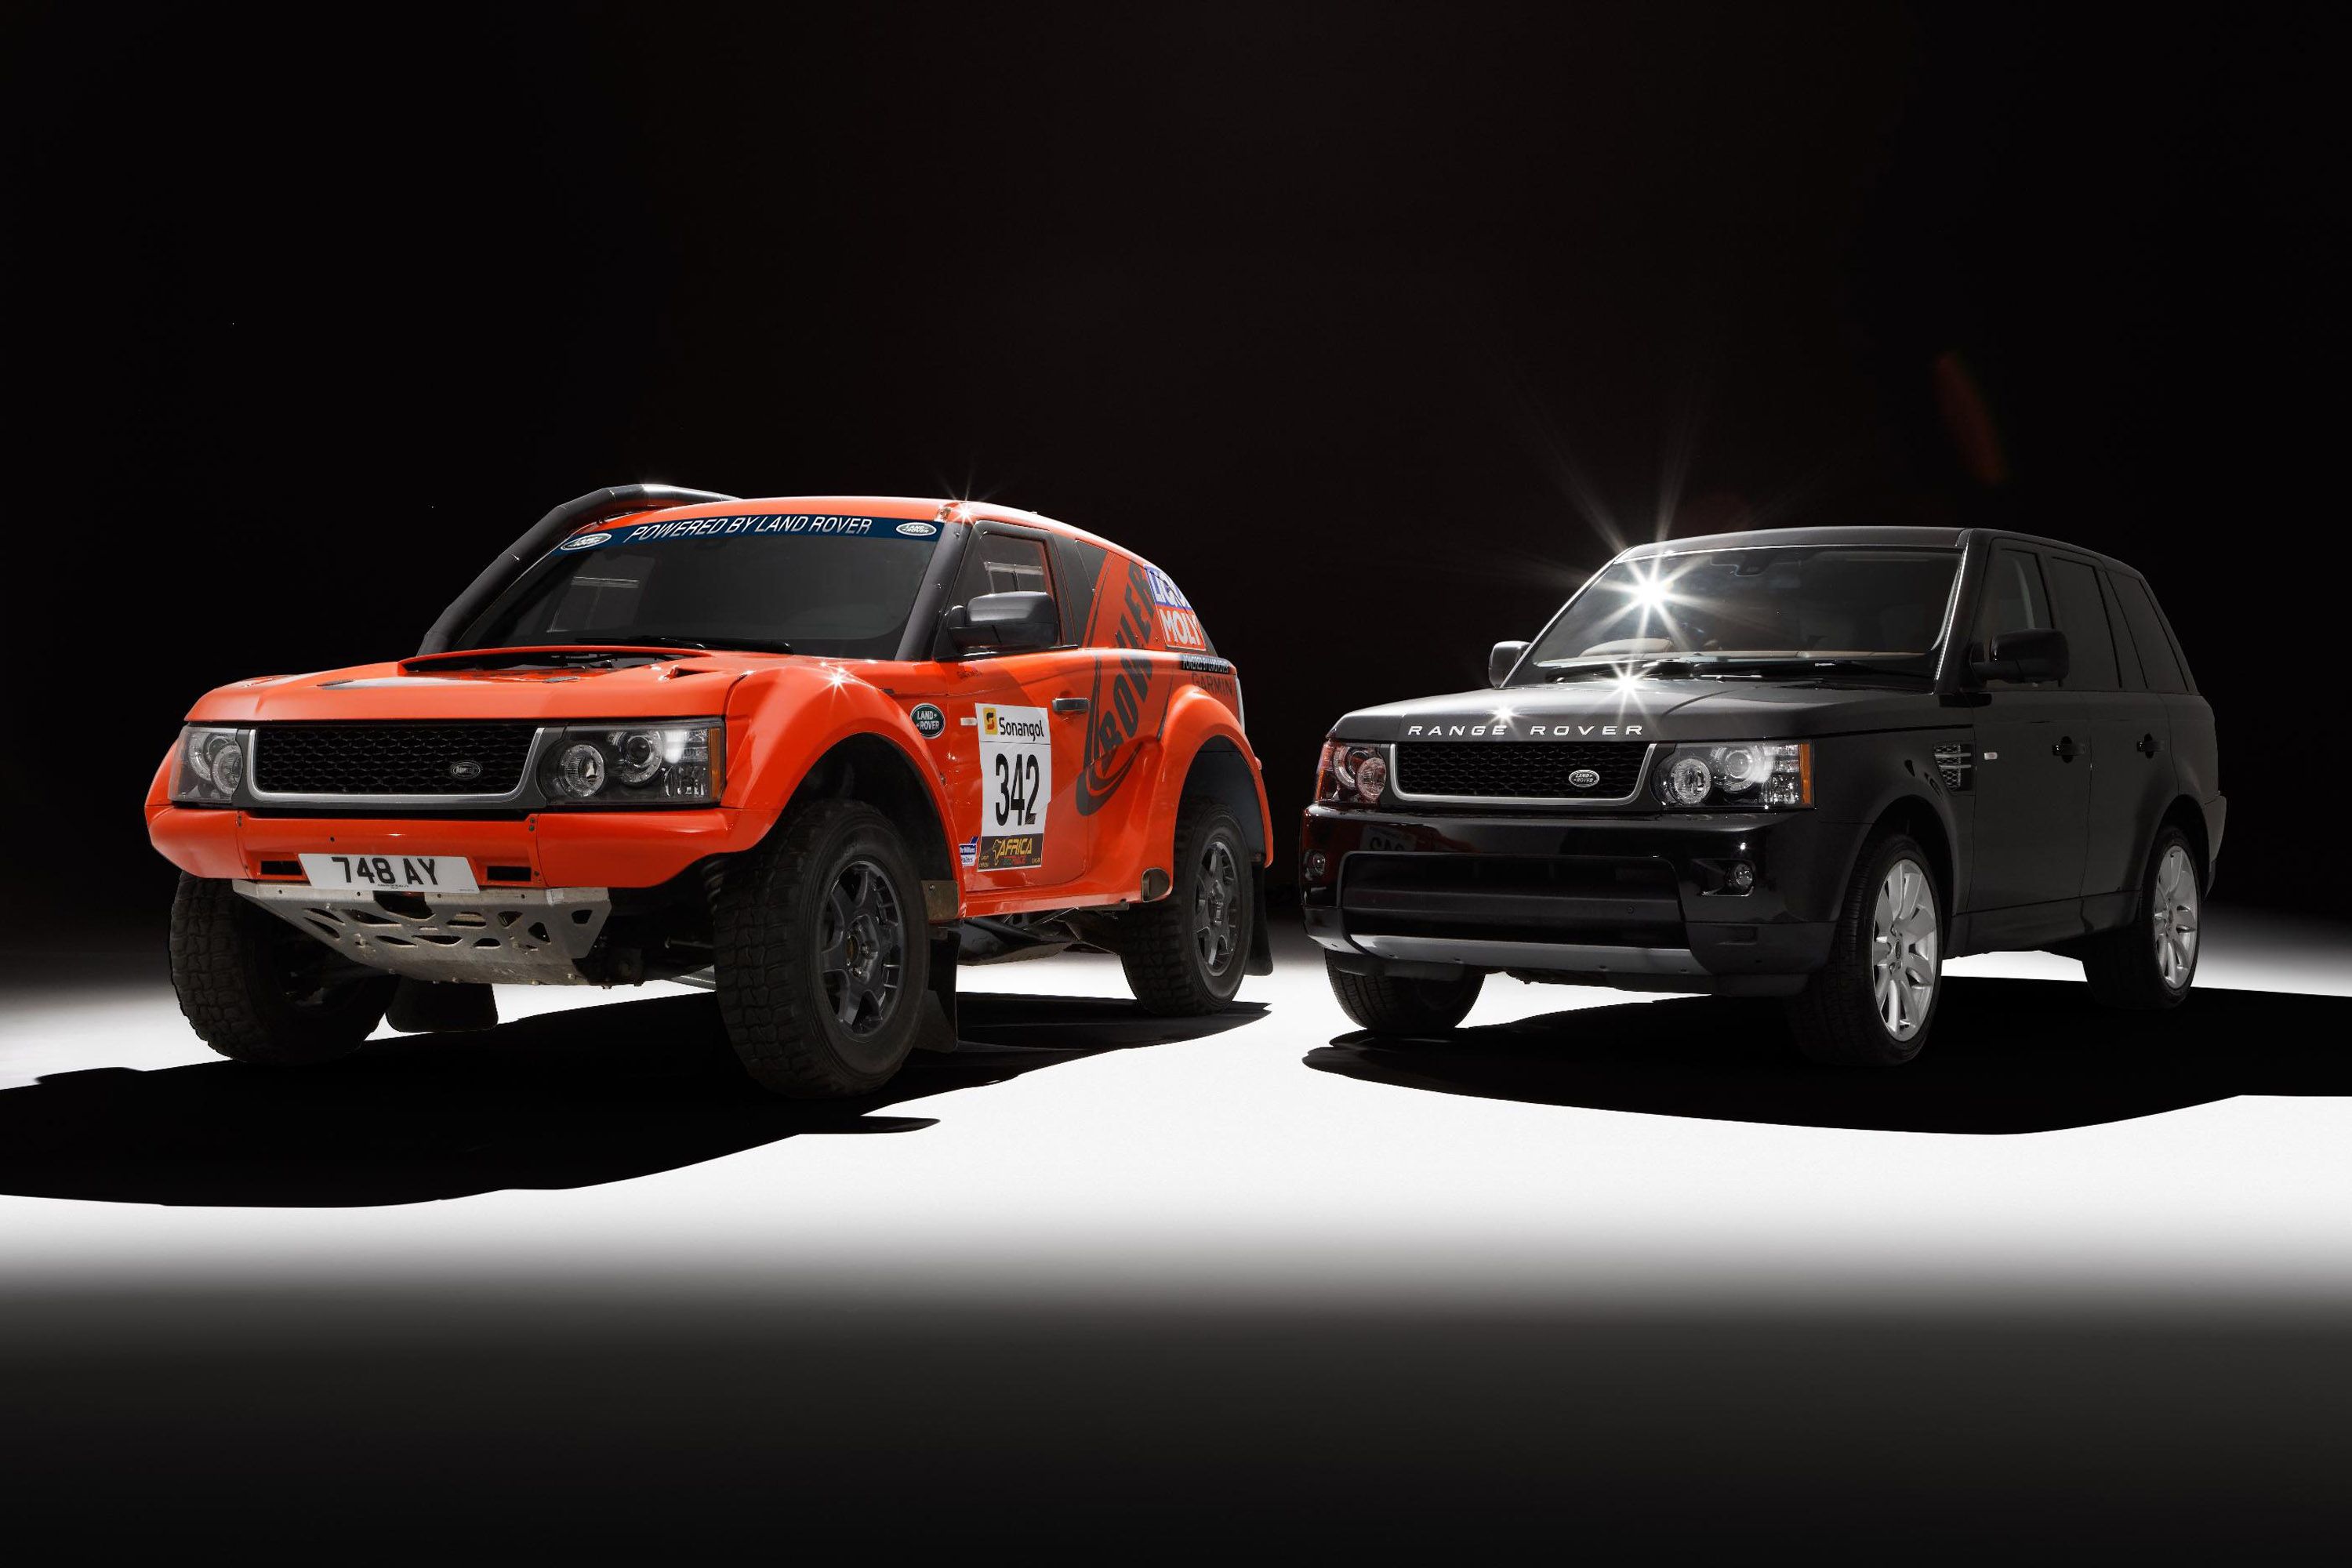 2012 Bowler EXR Rally Car by Land Rover